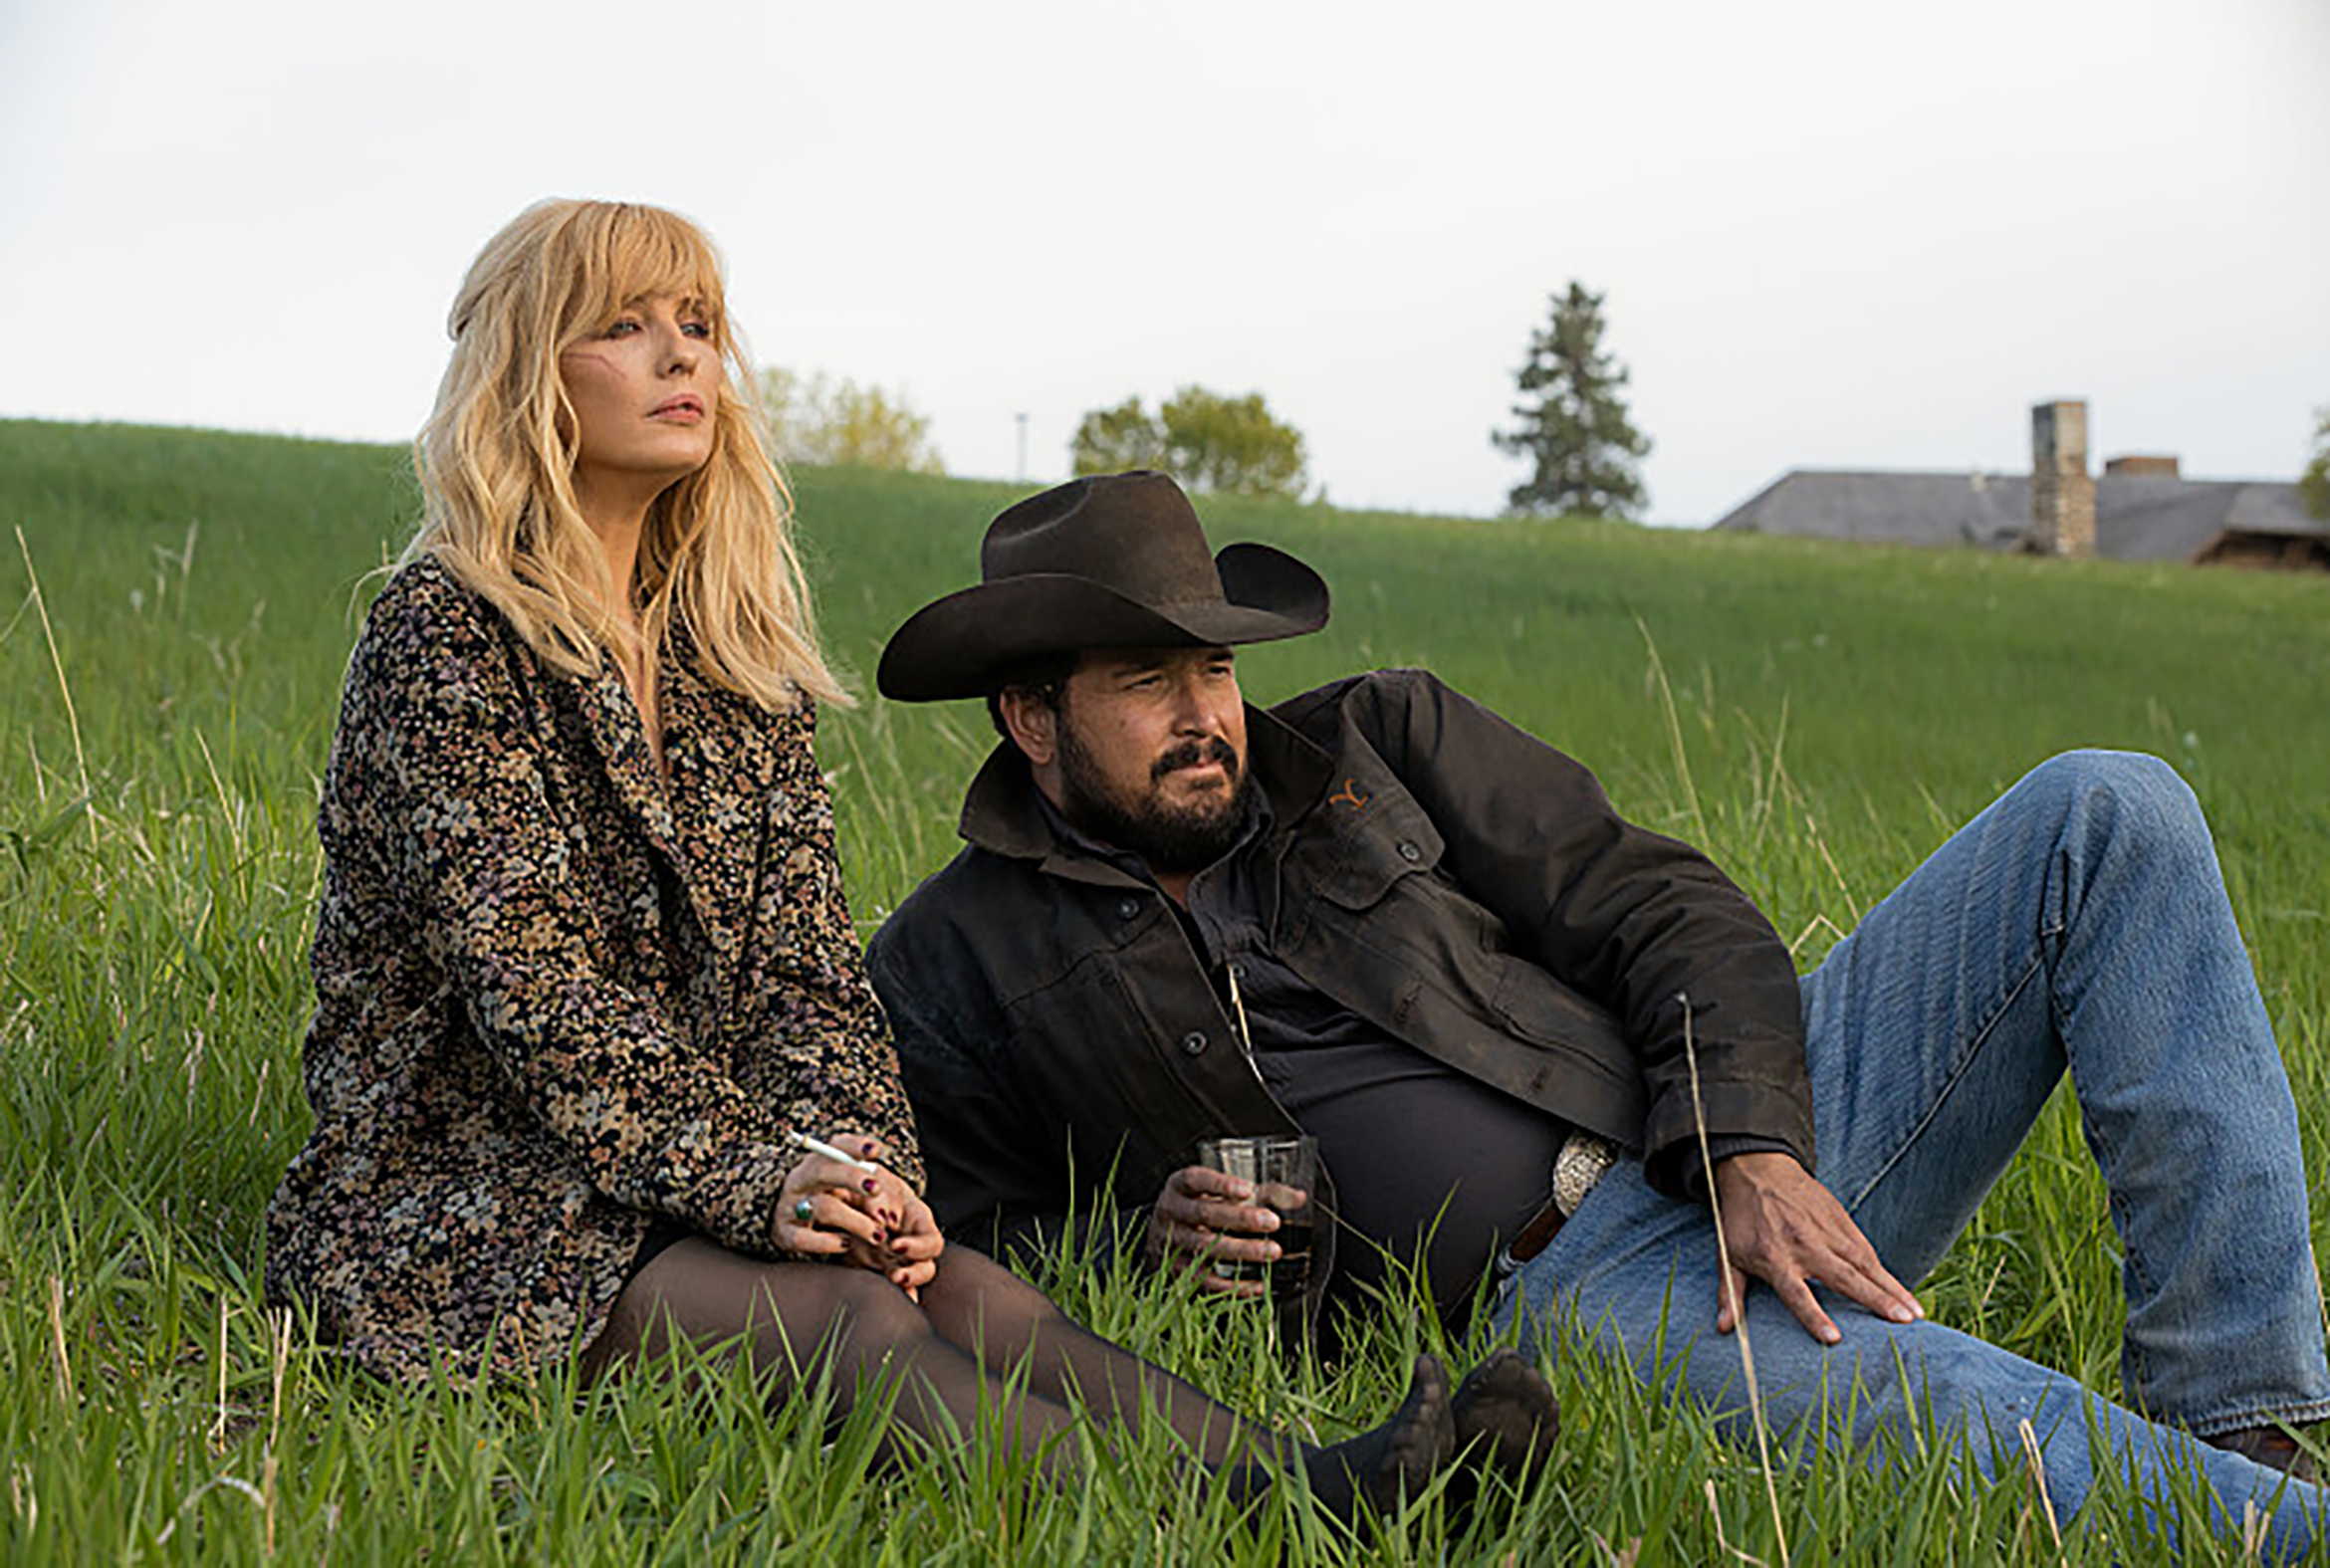 Inside Look The Surprising Reasons Behind Yellowstone's Final Season and What's Next for Fans